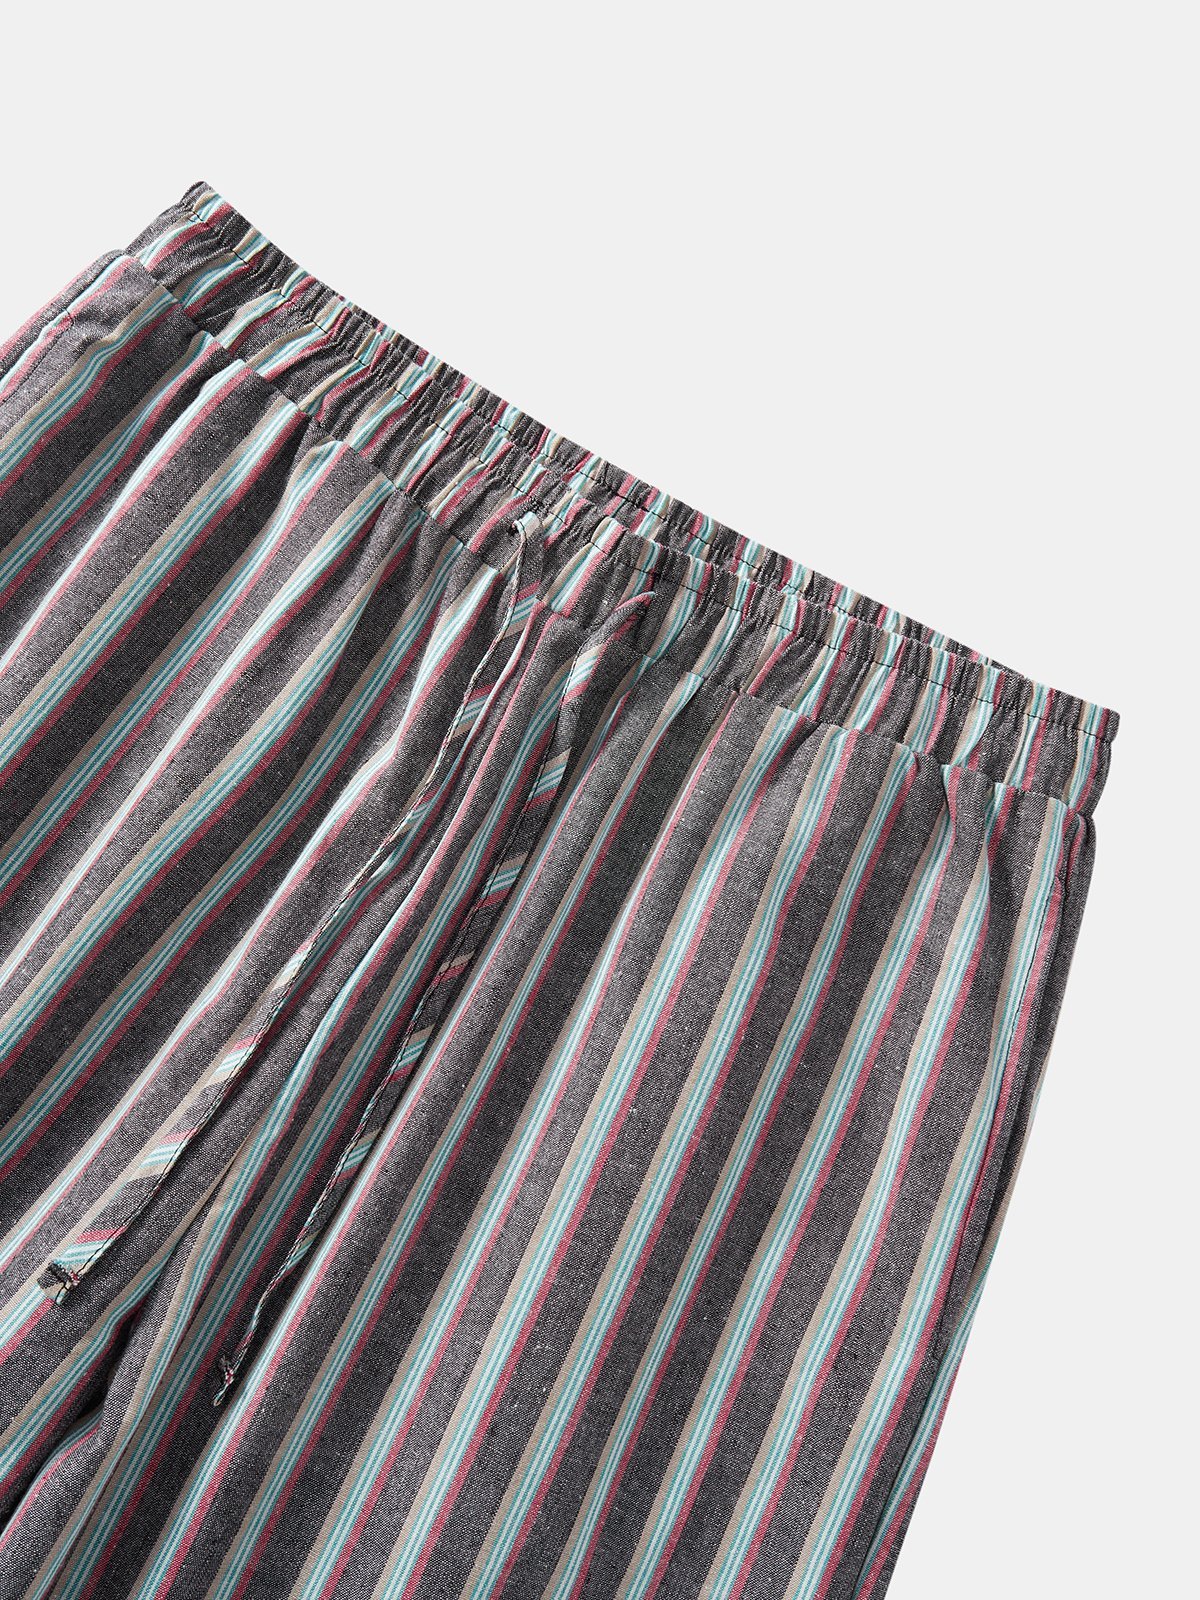 Hardaddy Cotton Striped Casual Cropped Pants